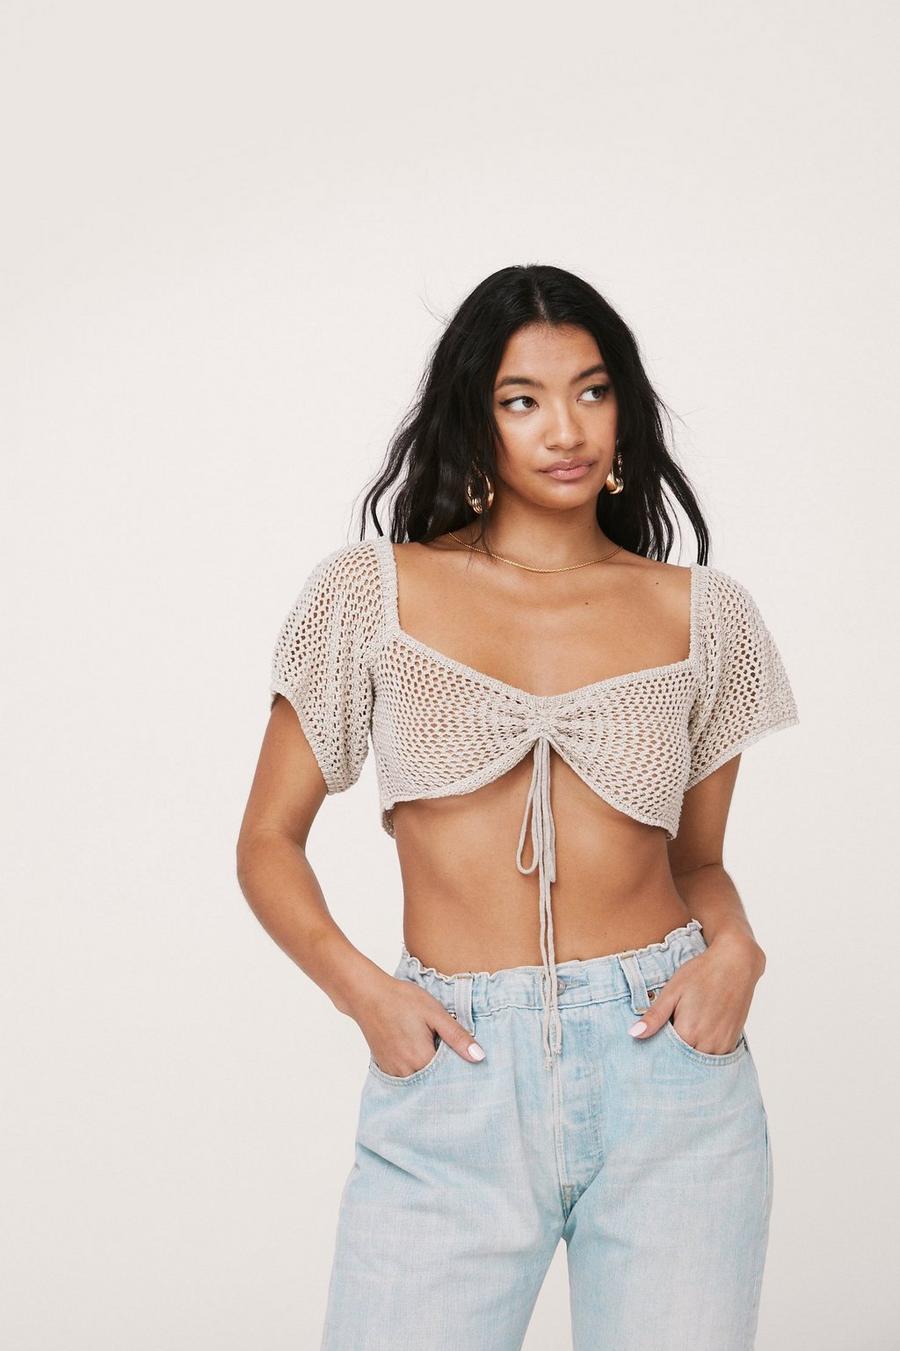 Crochet Puff Sleeve Cropped Beach Cover Up Top